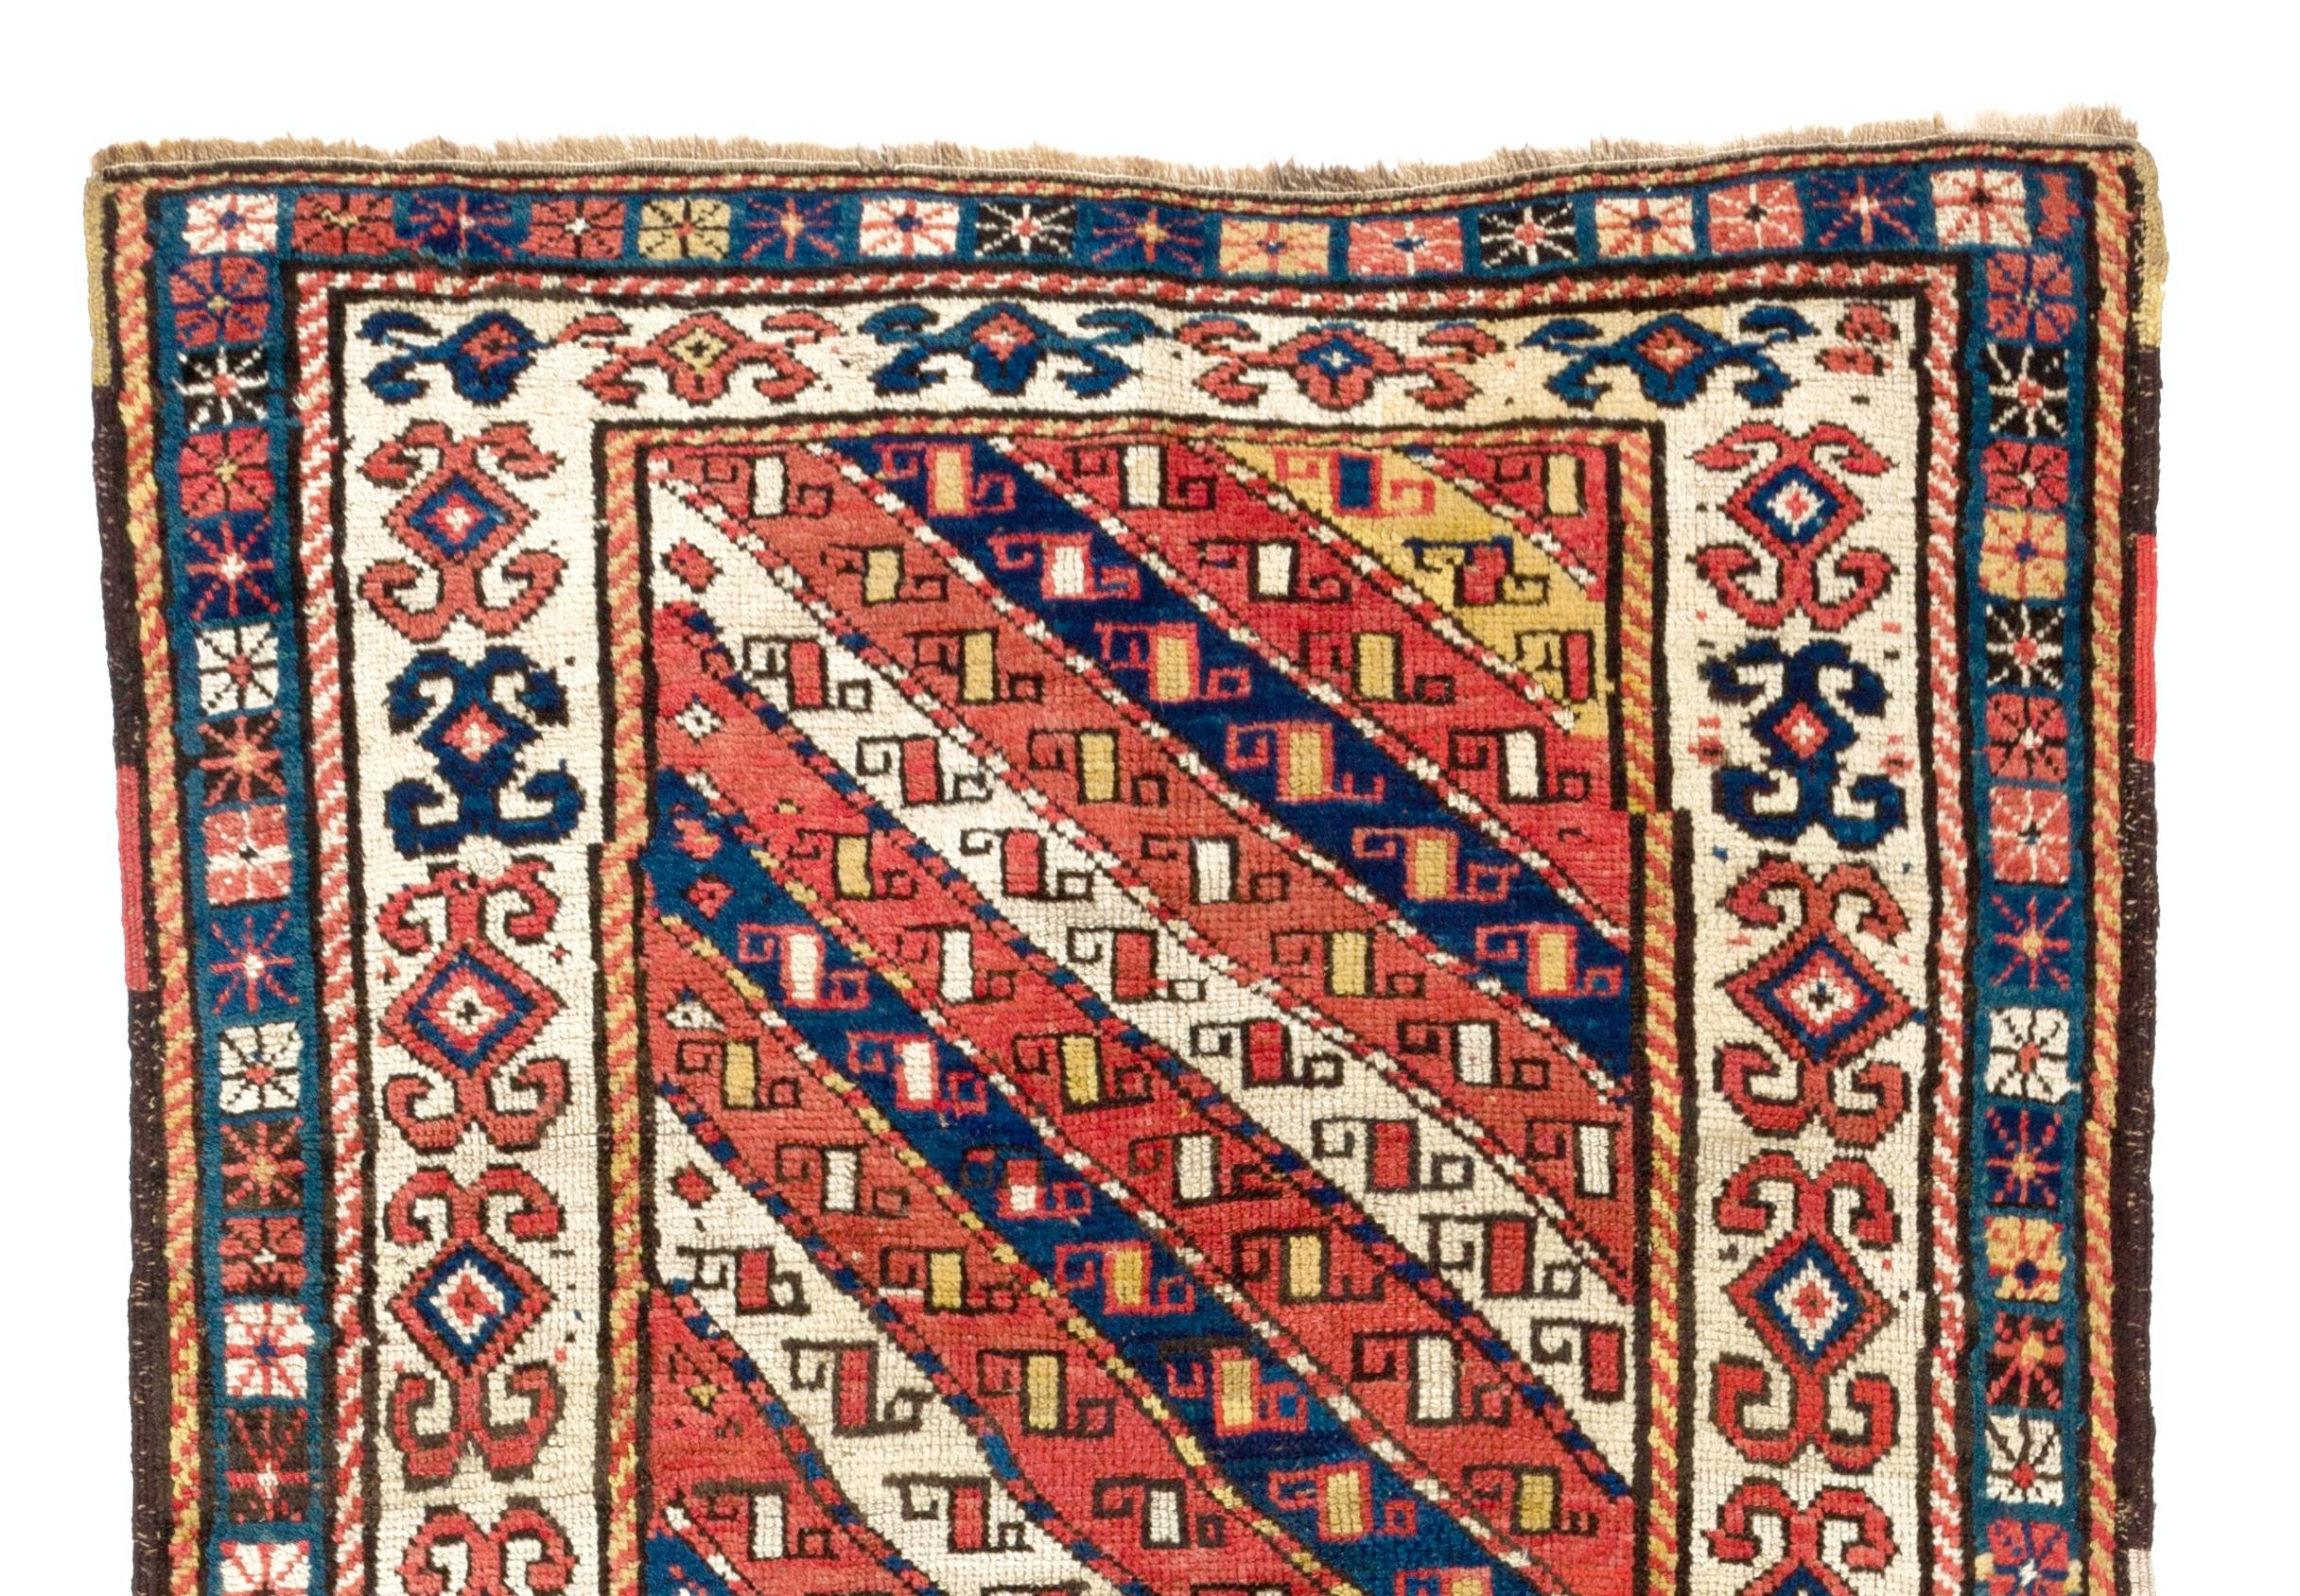 Antique Caucasian Gendje Kazak rug with diagonal stripes
All natural dyes, medium pile, very good original condition. Sturdy and as clean as a brand new rug (deep washed professionally). 
Size: 3.3 x 7.5 ft.